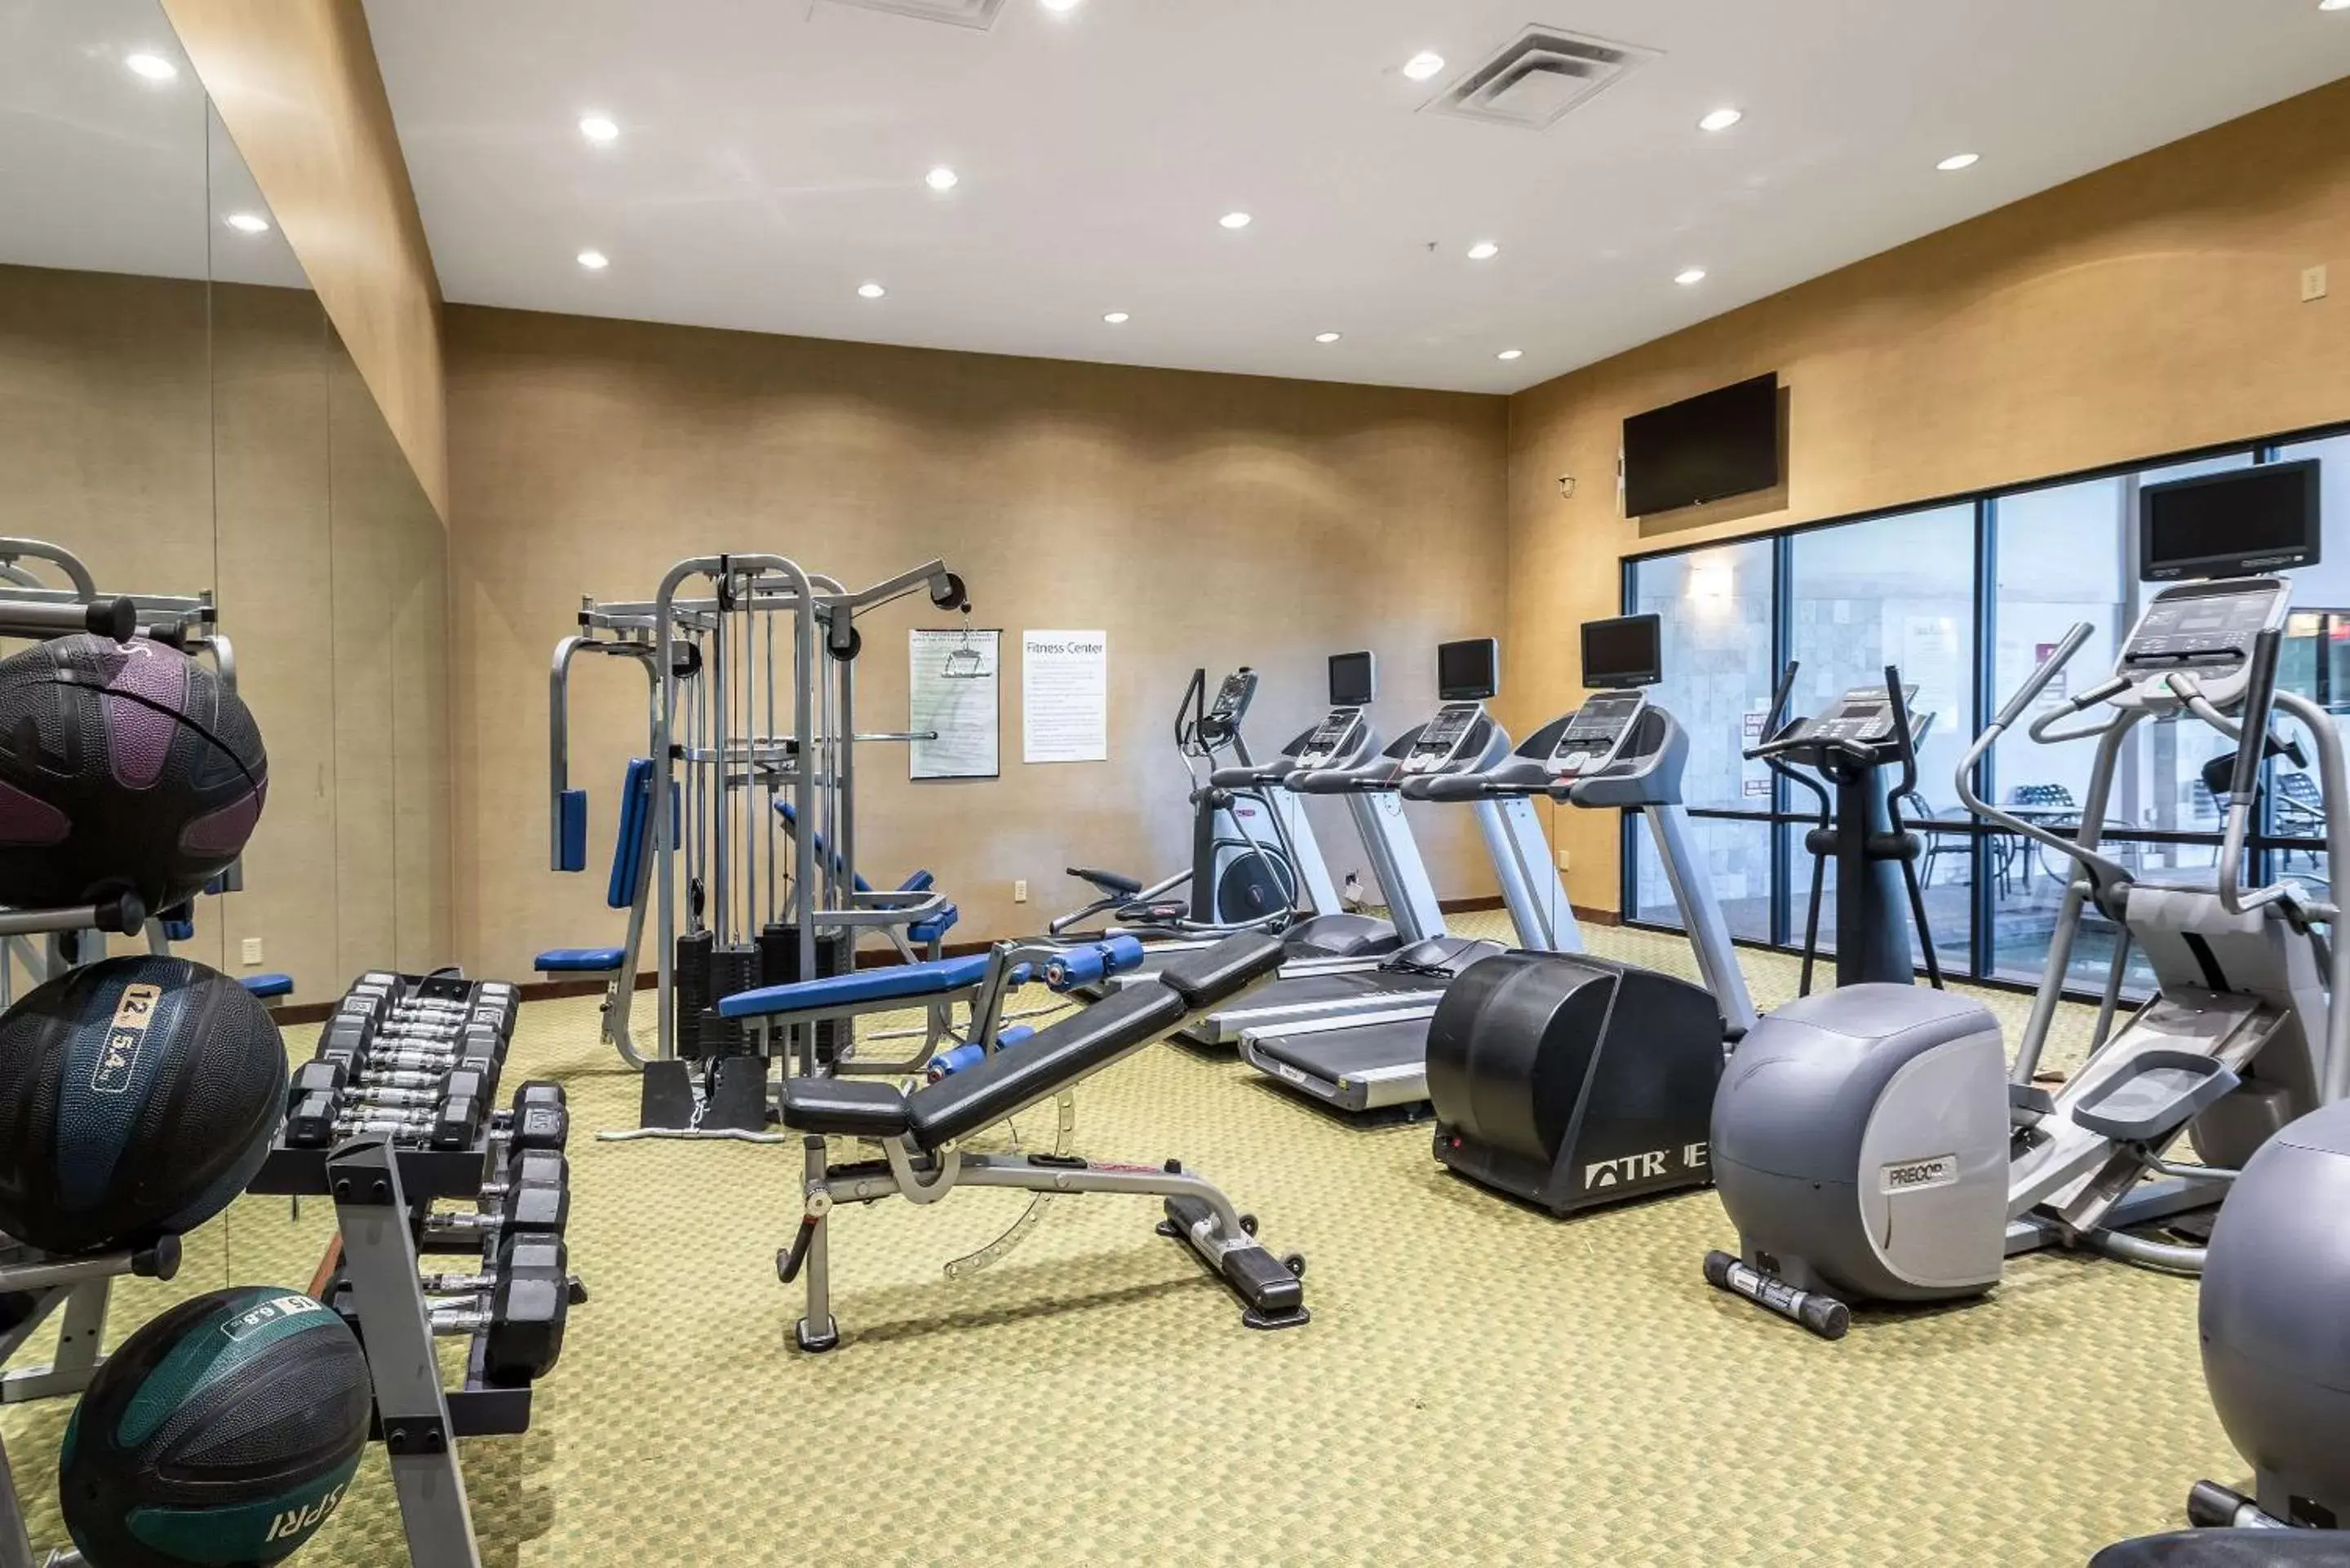 Fitness centre/facilities, Fitness Center/Facilities in The Grand Hotel, Ascend Hotel Collection